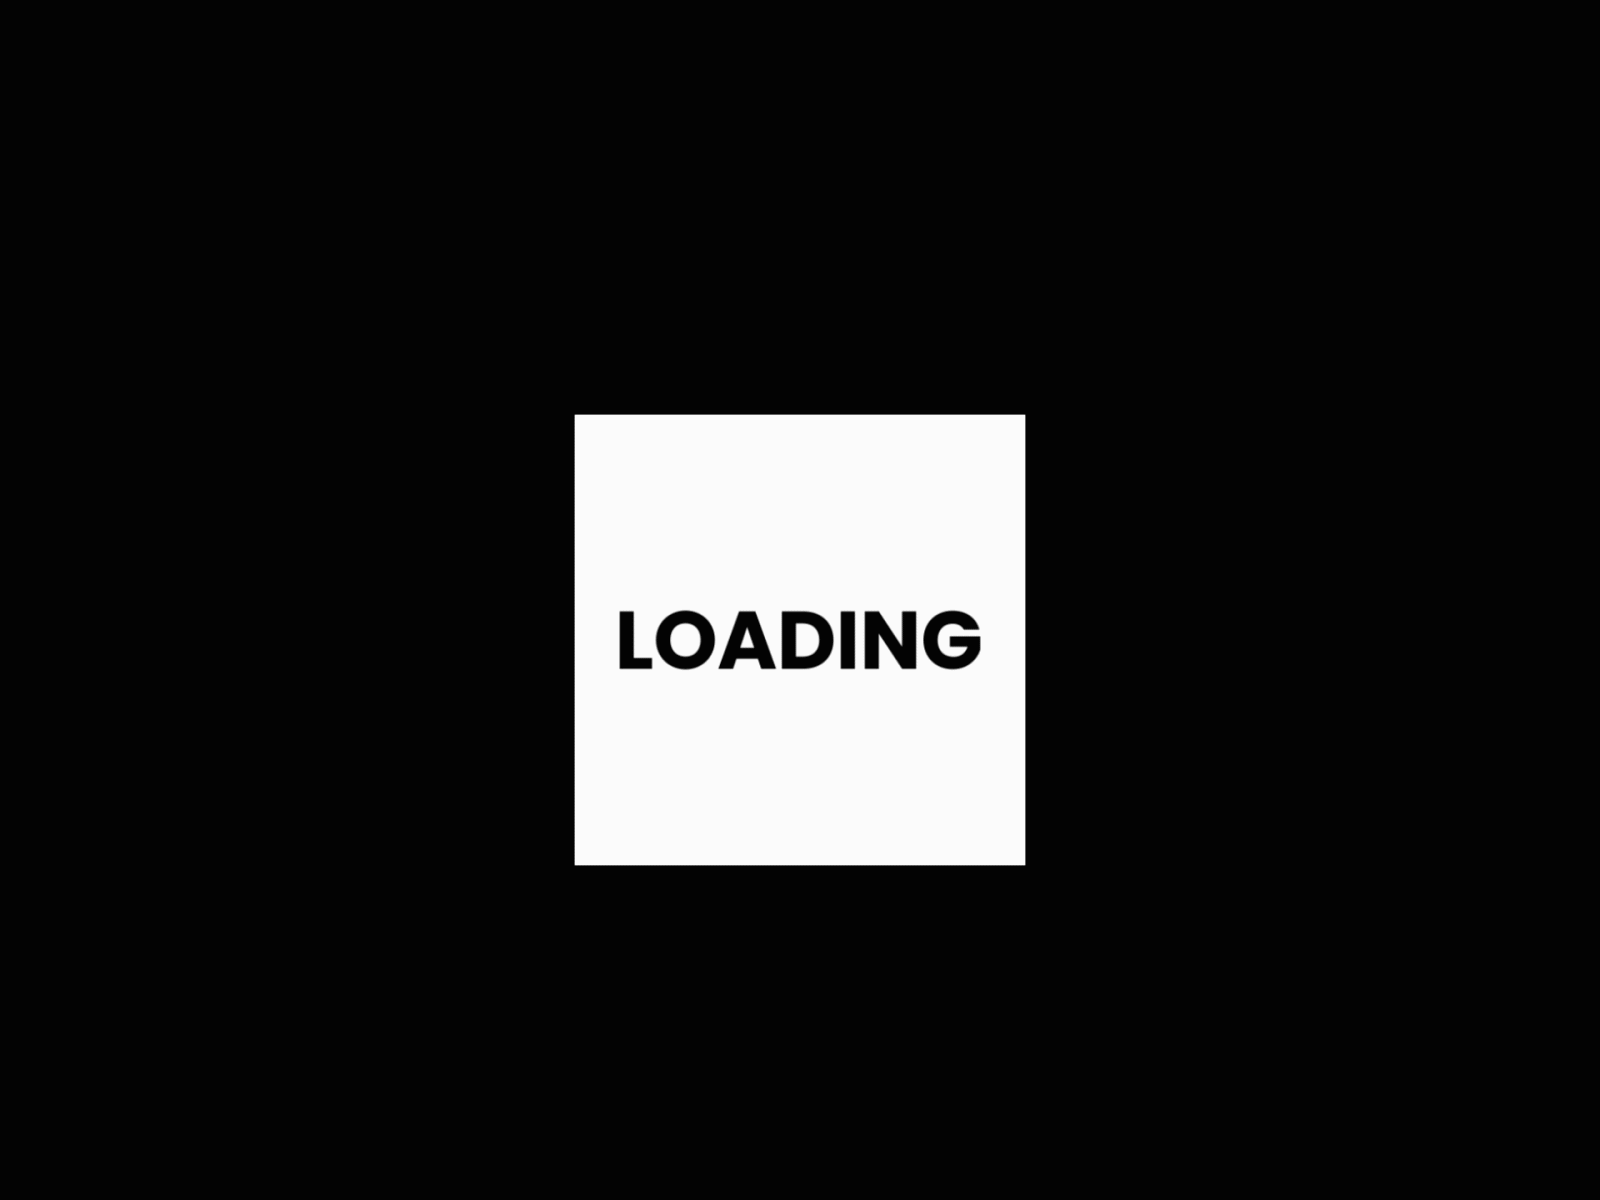 Loading Animation for slow website by Max Forslund on Dribbble